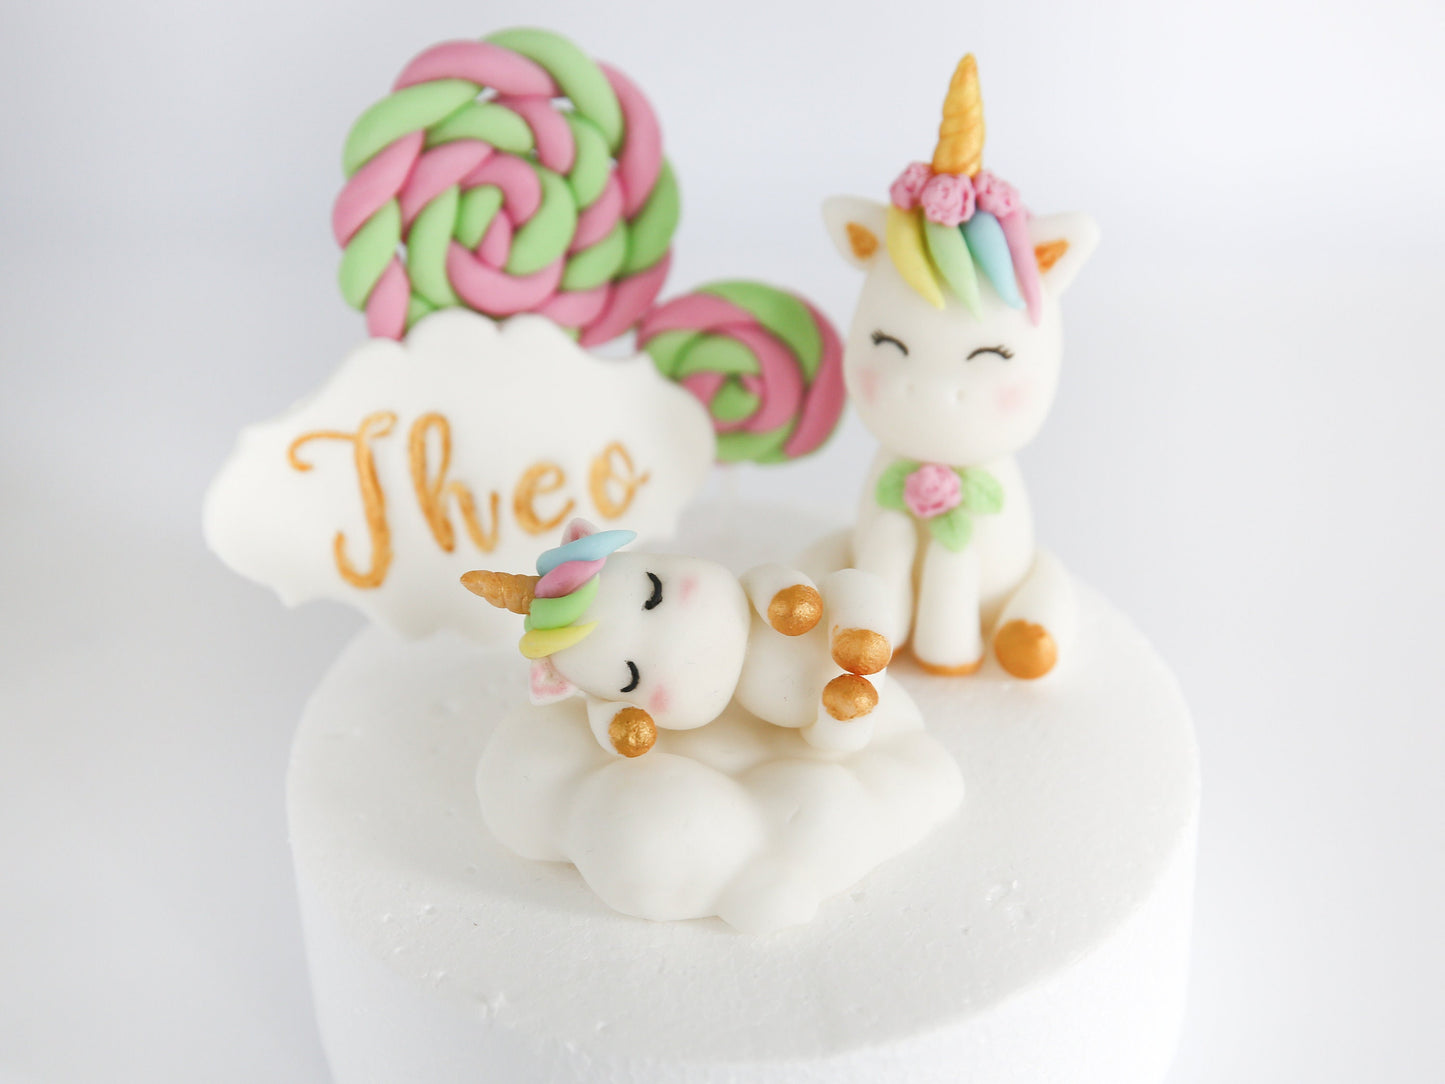 Cute Baby Unicorn Cake Topper Fondant in Cloud Bed and Smiling Unicorn with Lollipops and Name Tag